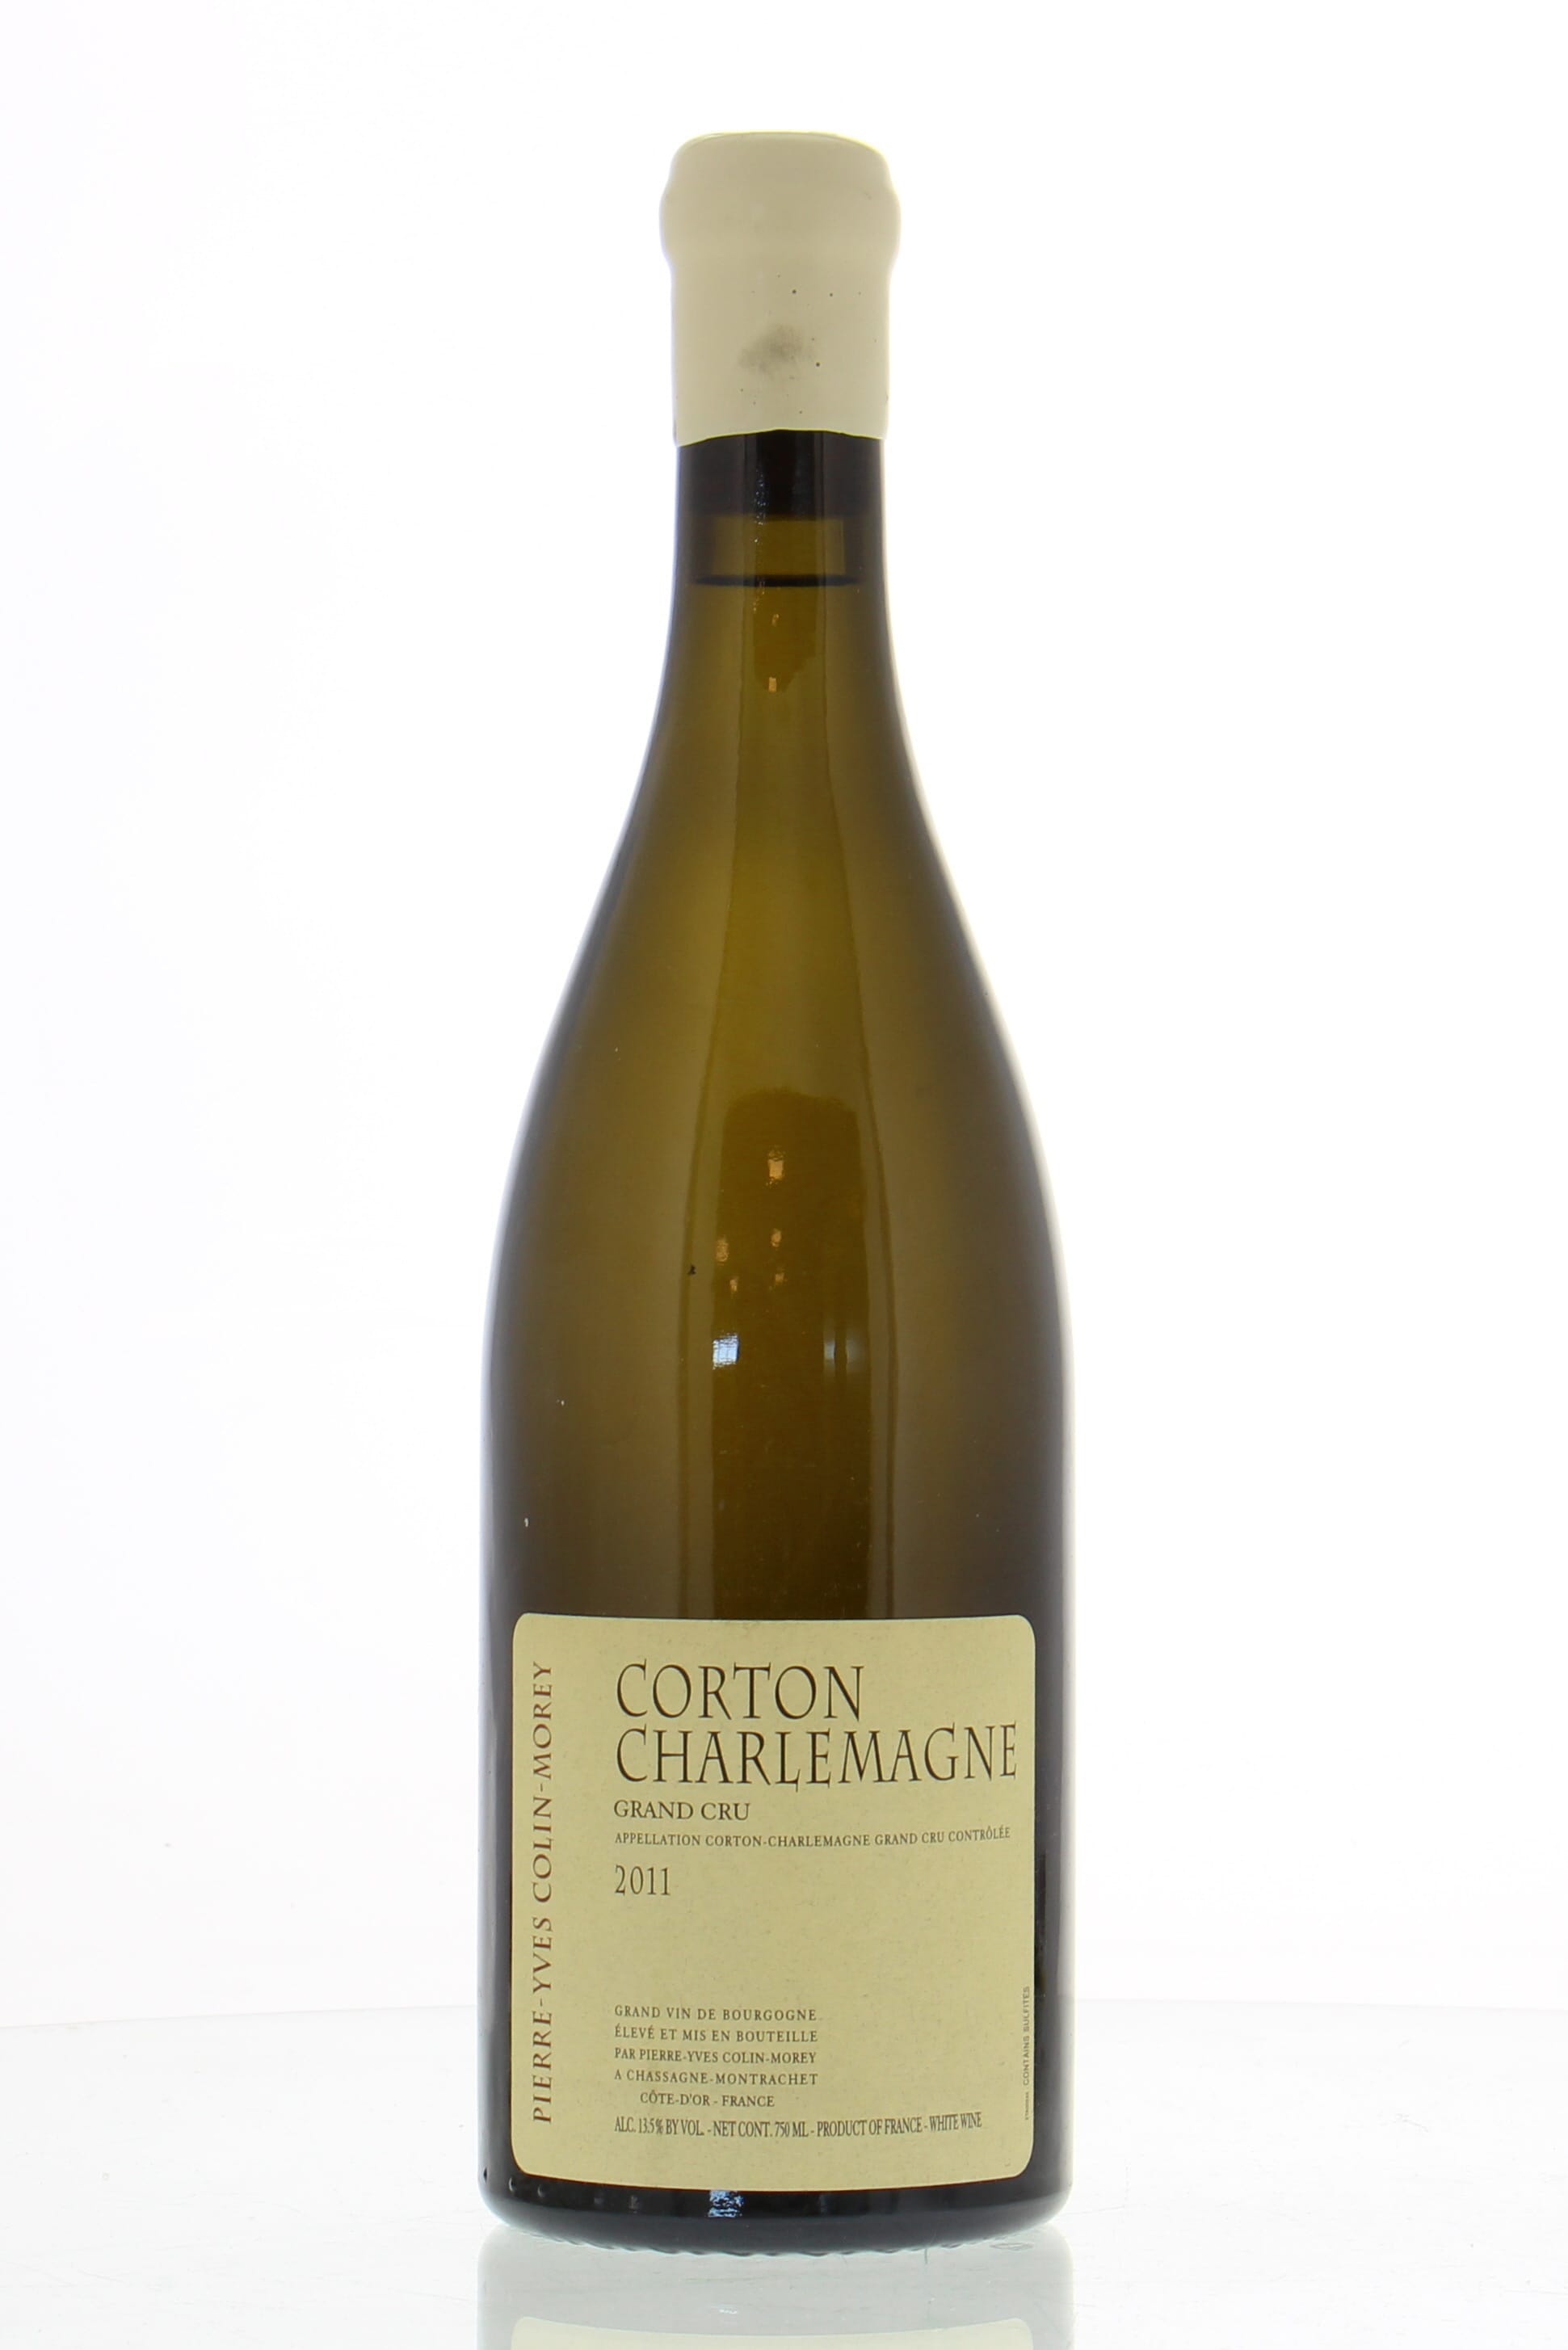 Pierre-Yves Colin-Morey - Corton Charlemagne 2011